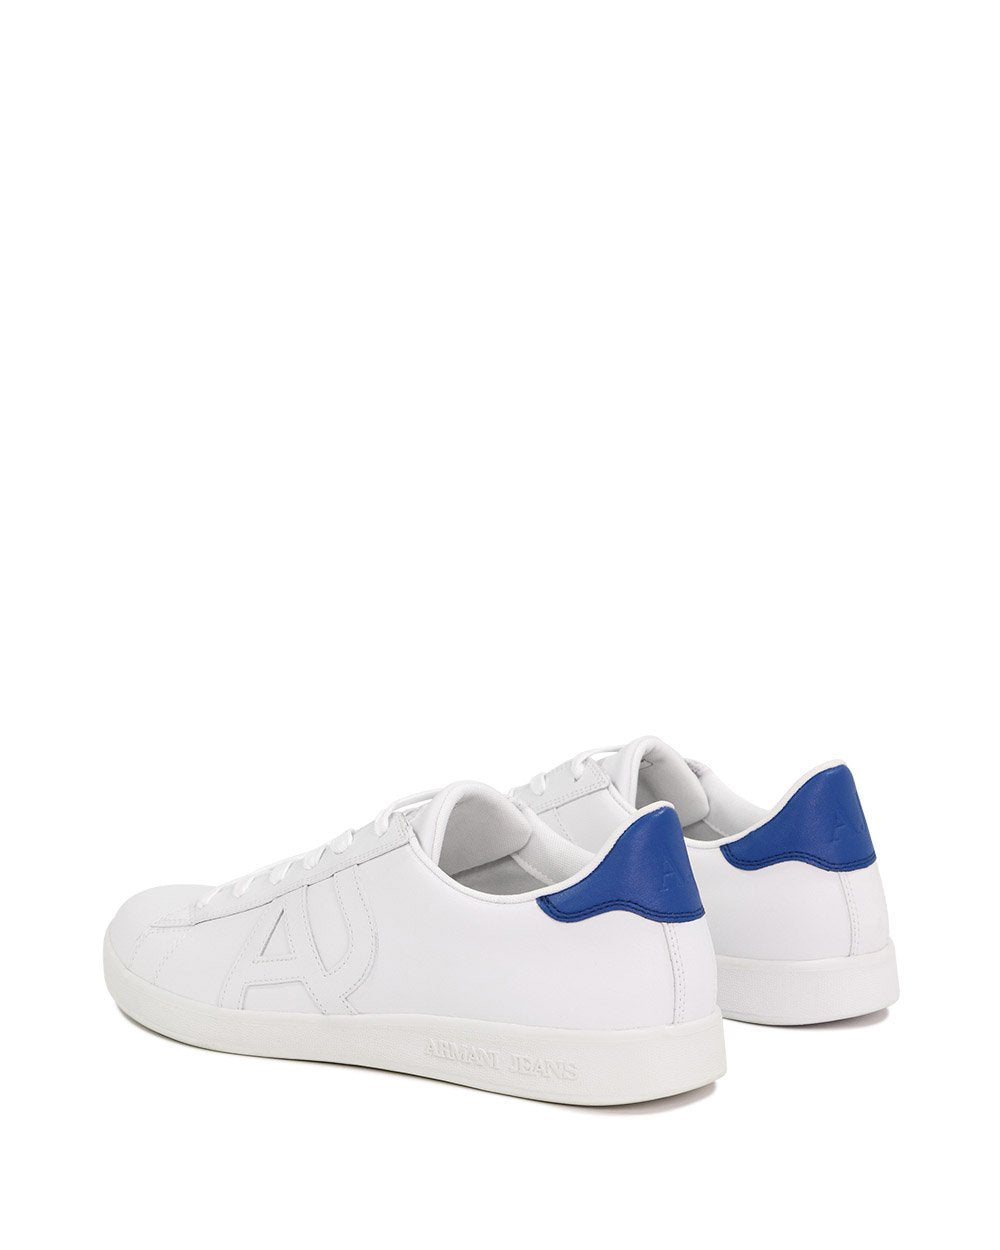 AJ Logo Round-Toe Rubber Sole Sneakers - ISSI Outlet